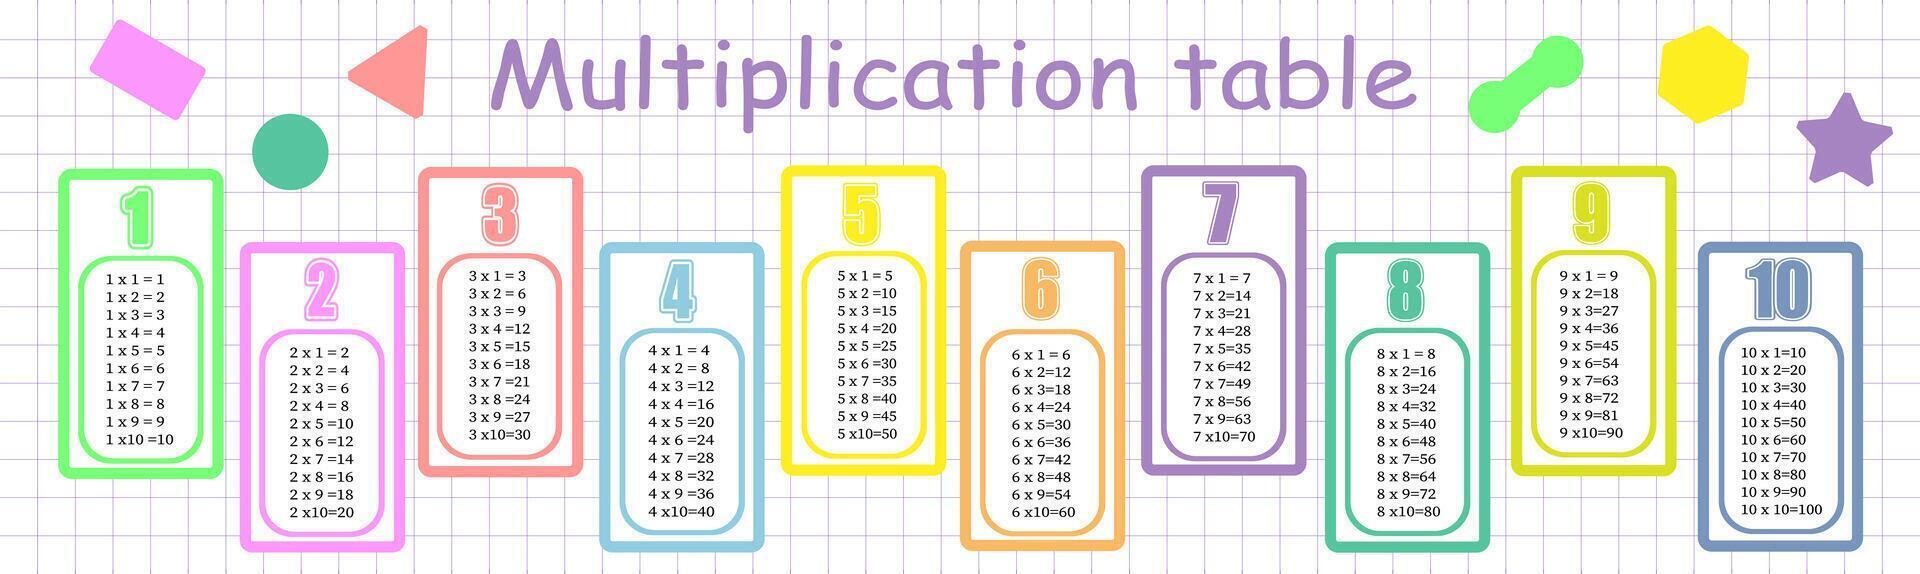 Multiplication table from 1 to 10. Colorful cartoon multiplication table vector for teaching math. EPS10